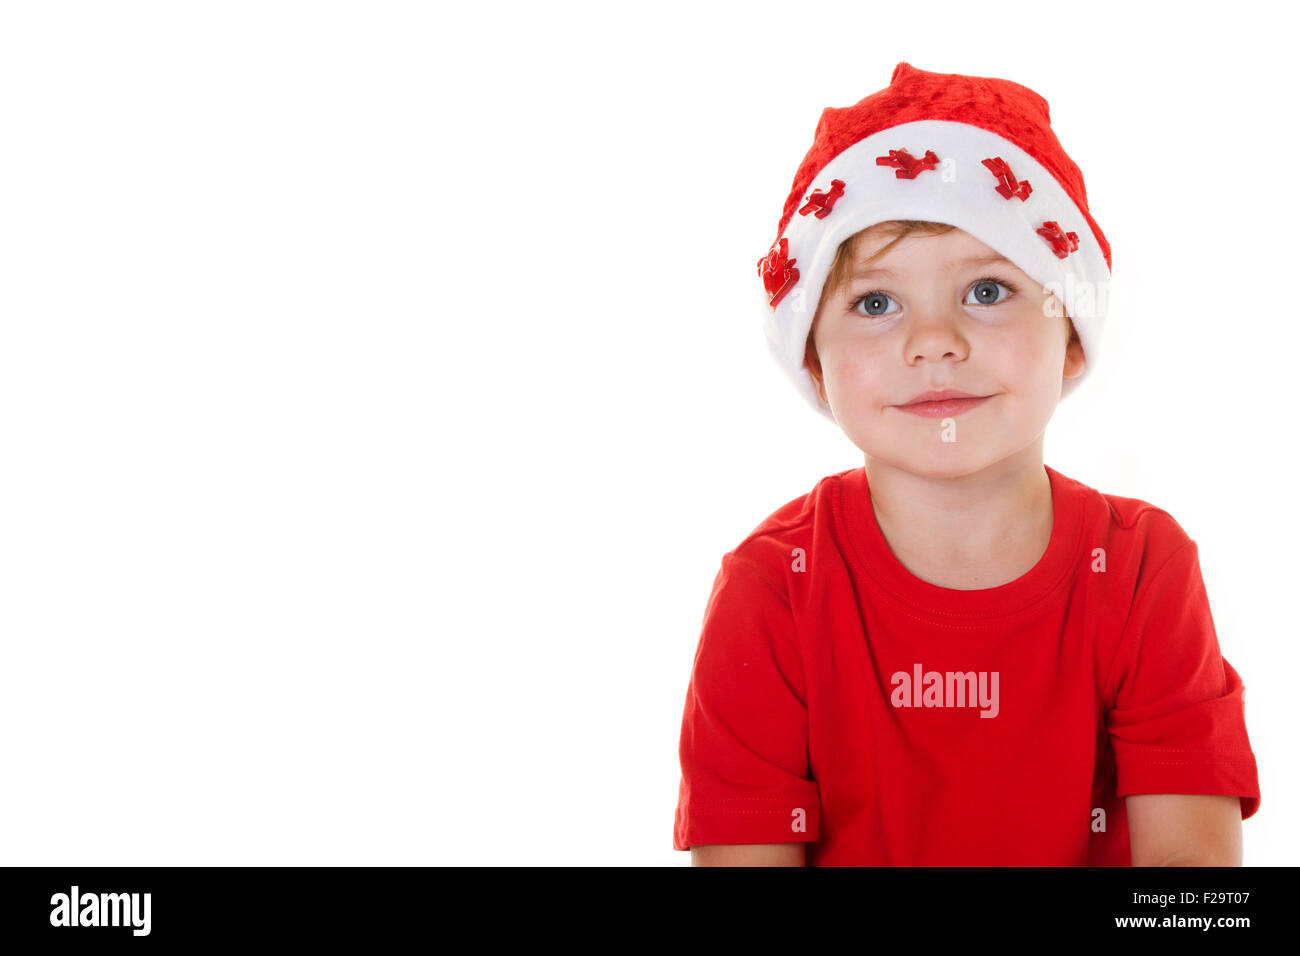 Young boy wearing a Santa hat looking away from the camera. Stock Photo